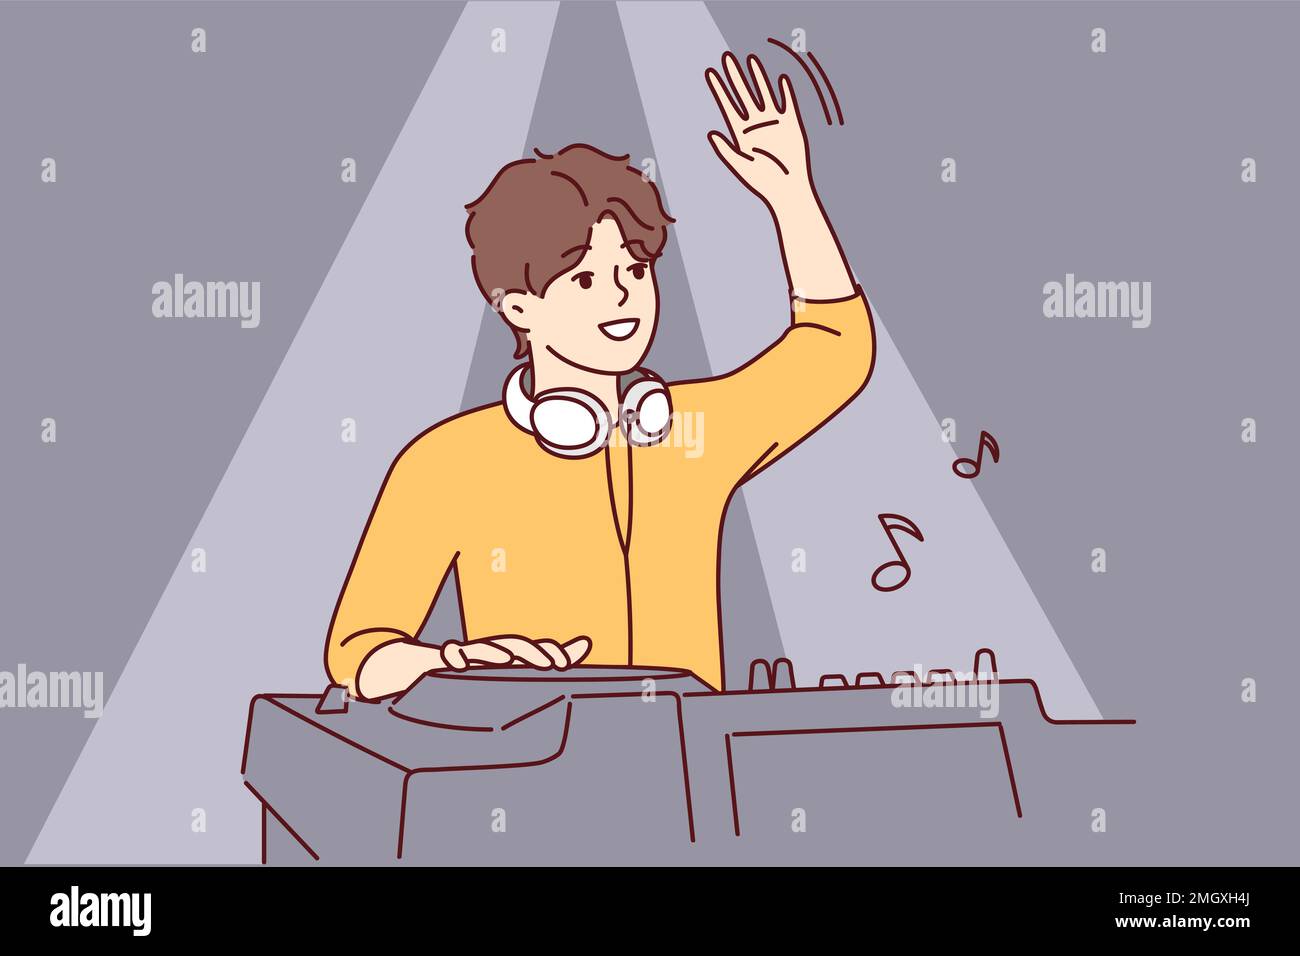 Male DJ waving to greet club goers and cheer up dancing people. Guy with headphones around neck stands behind mixing console while controlling music at party. Flat vector illustration Stock Vector